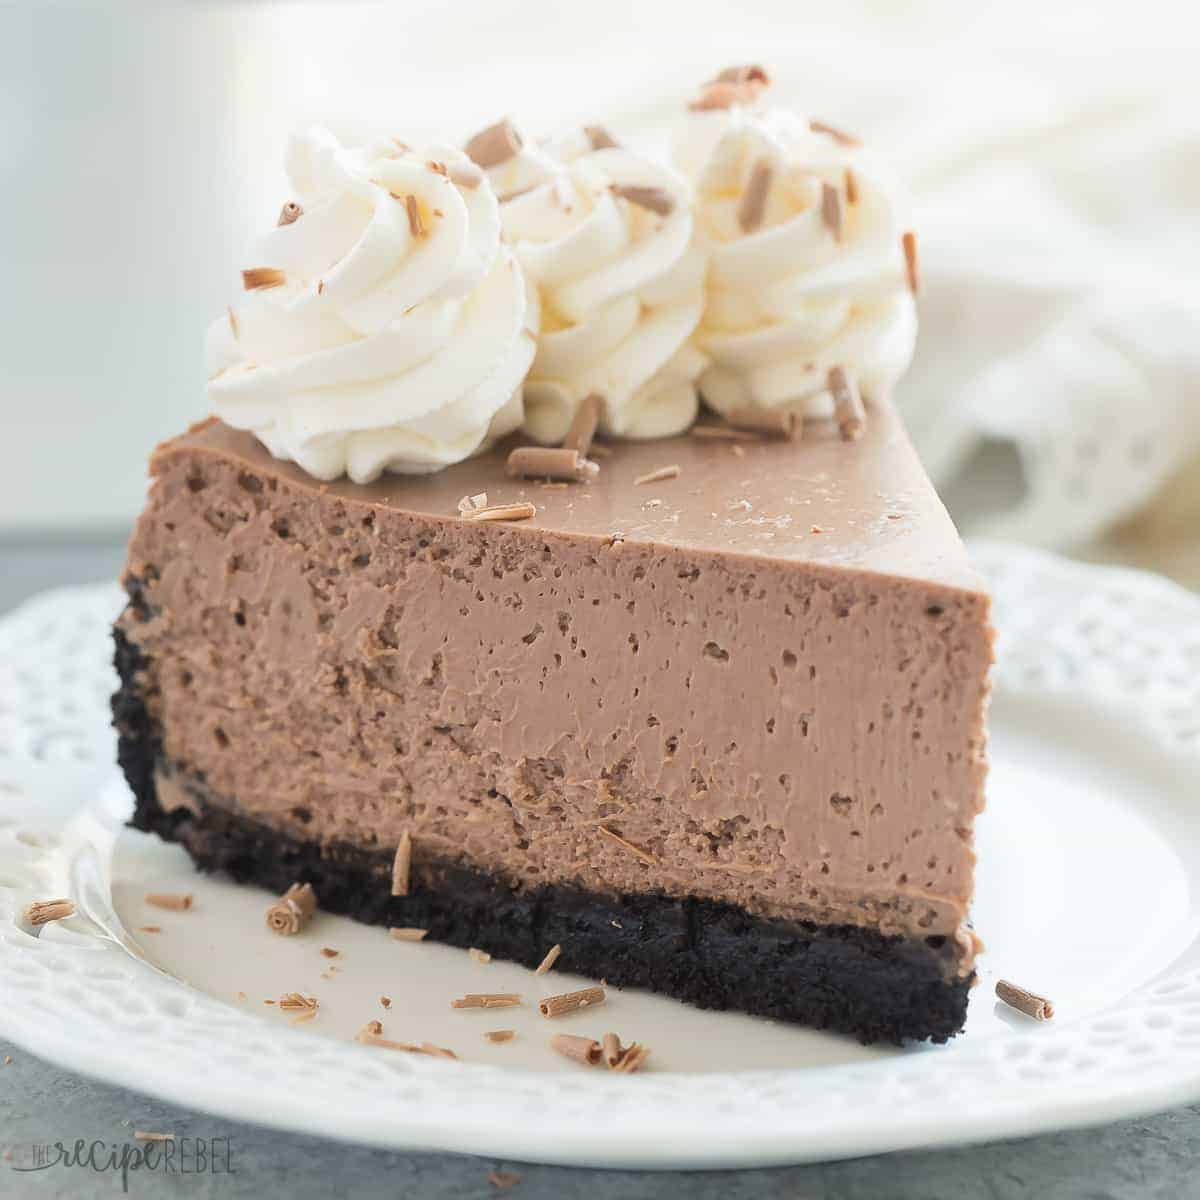 This is the BEST Chocolate Cheesecake! It's perfectly rich, creamy (with the help of Greek yogurt), and bakes up with no cracking and no water bath needed. This is the easy way to perfect baked cheesecake!